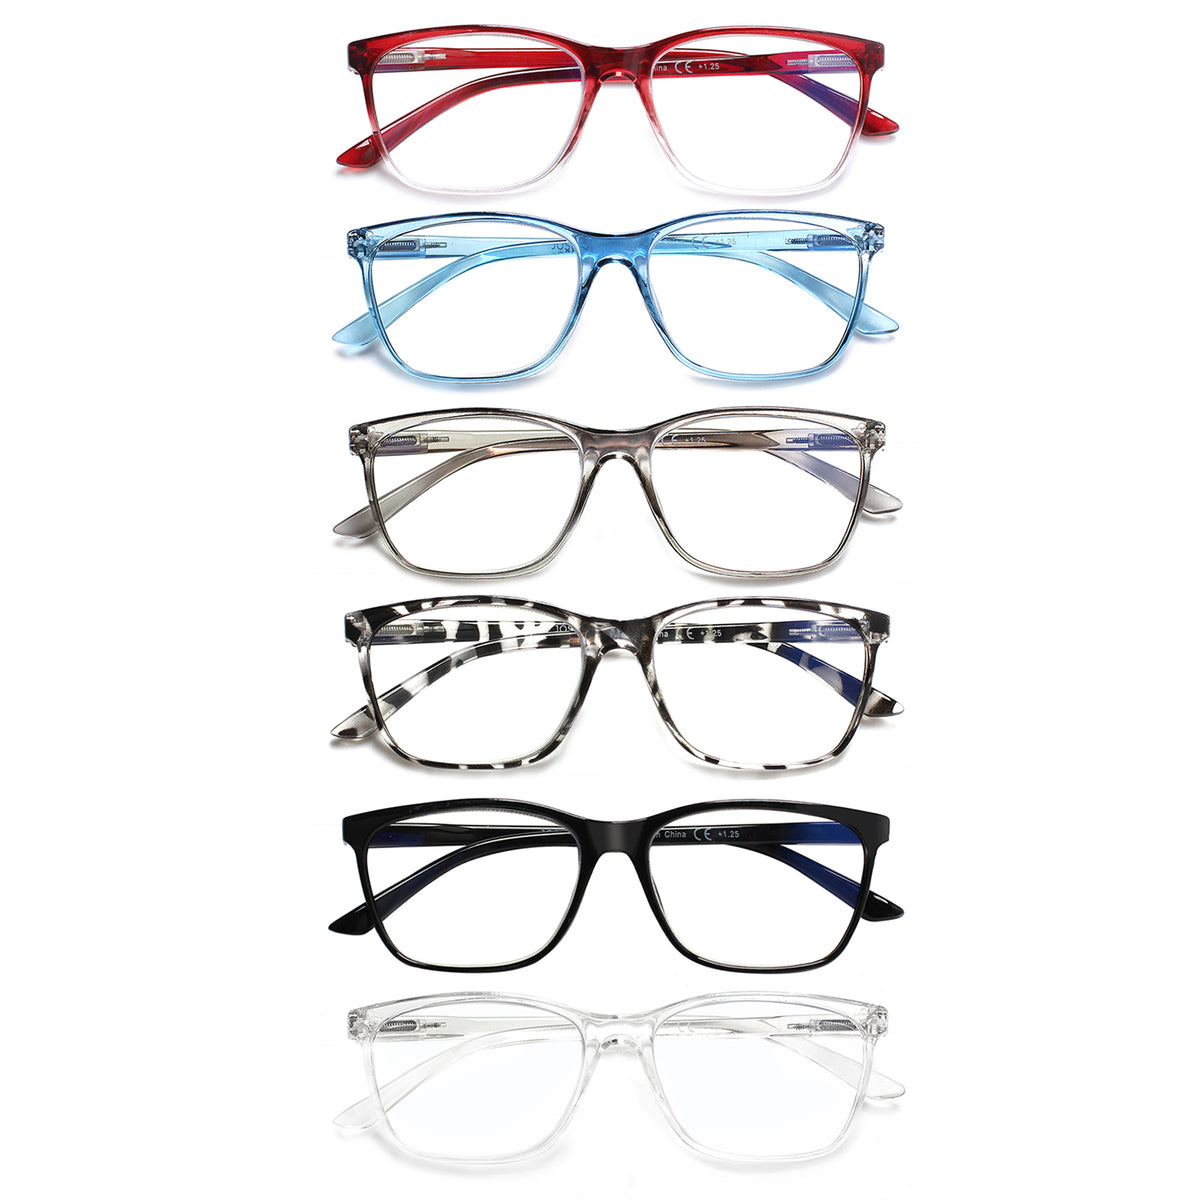 6 Pack Square Reading Glasses Blue Light Blocking Computer Readers 246